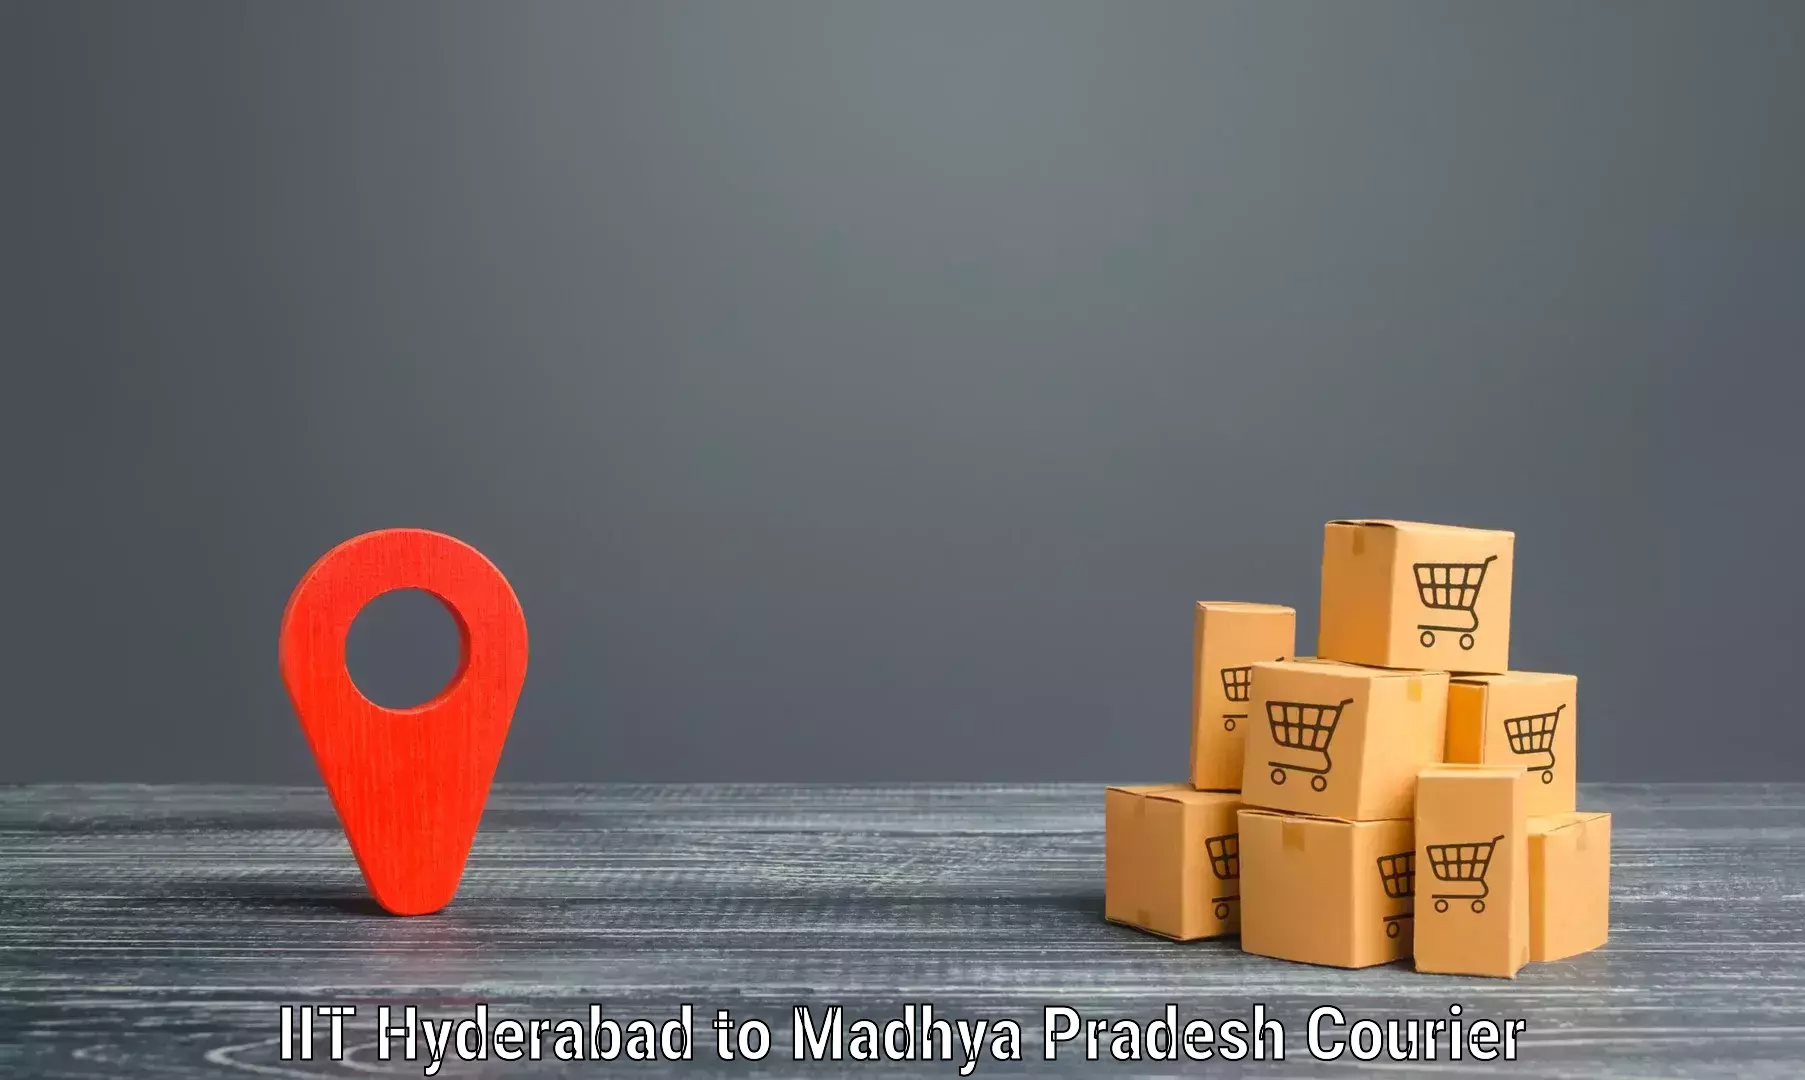 User-friendly delivery service IIT Hyderabad to Ratangarh MP